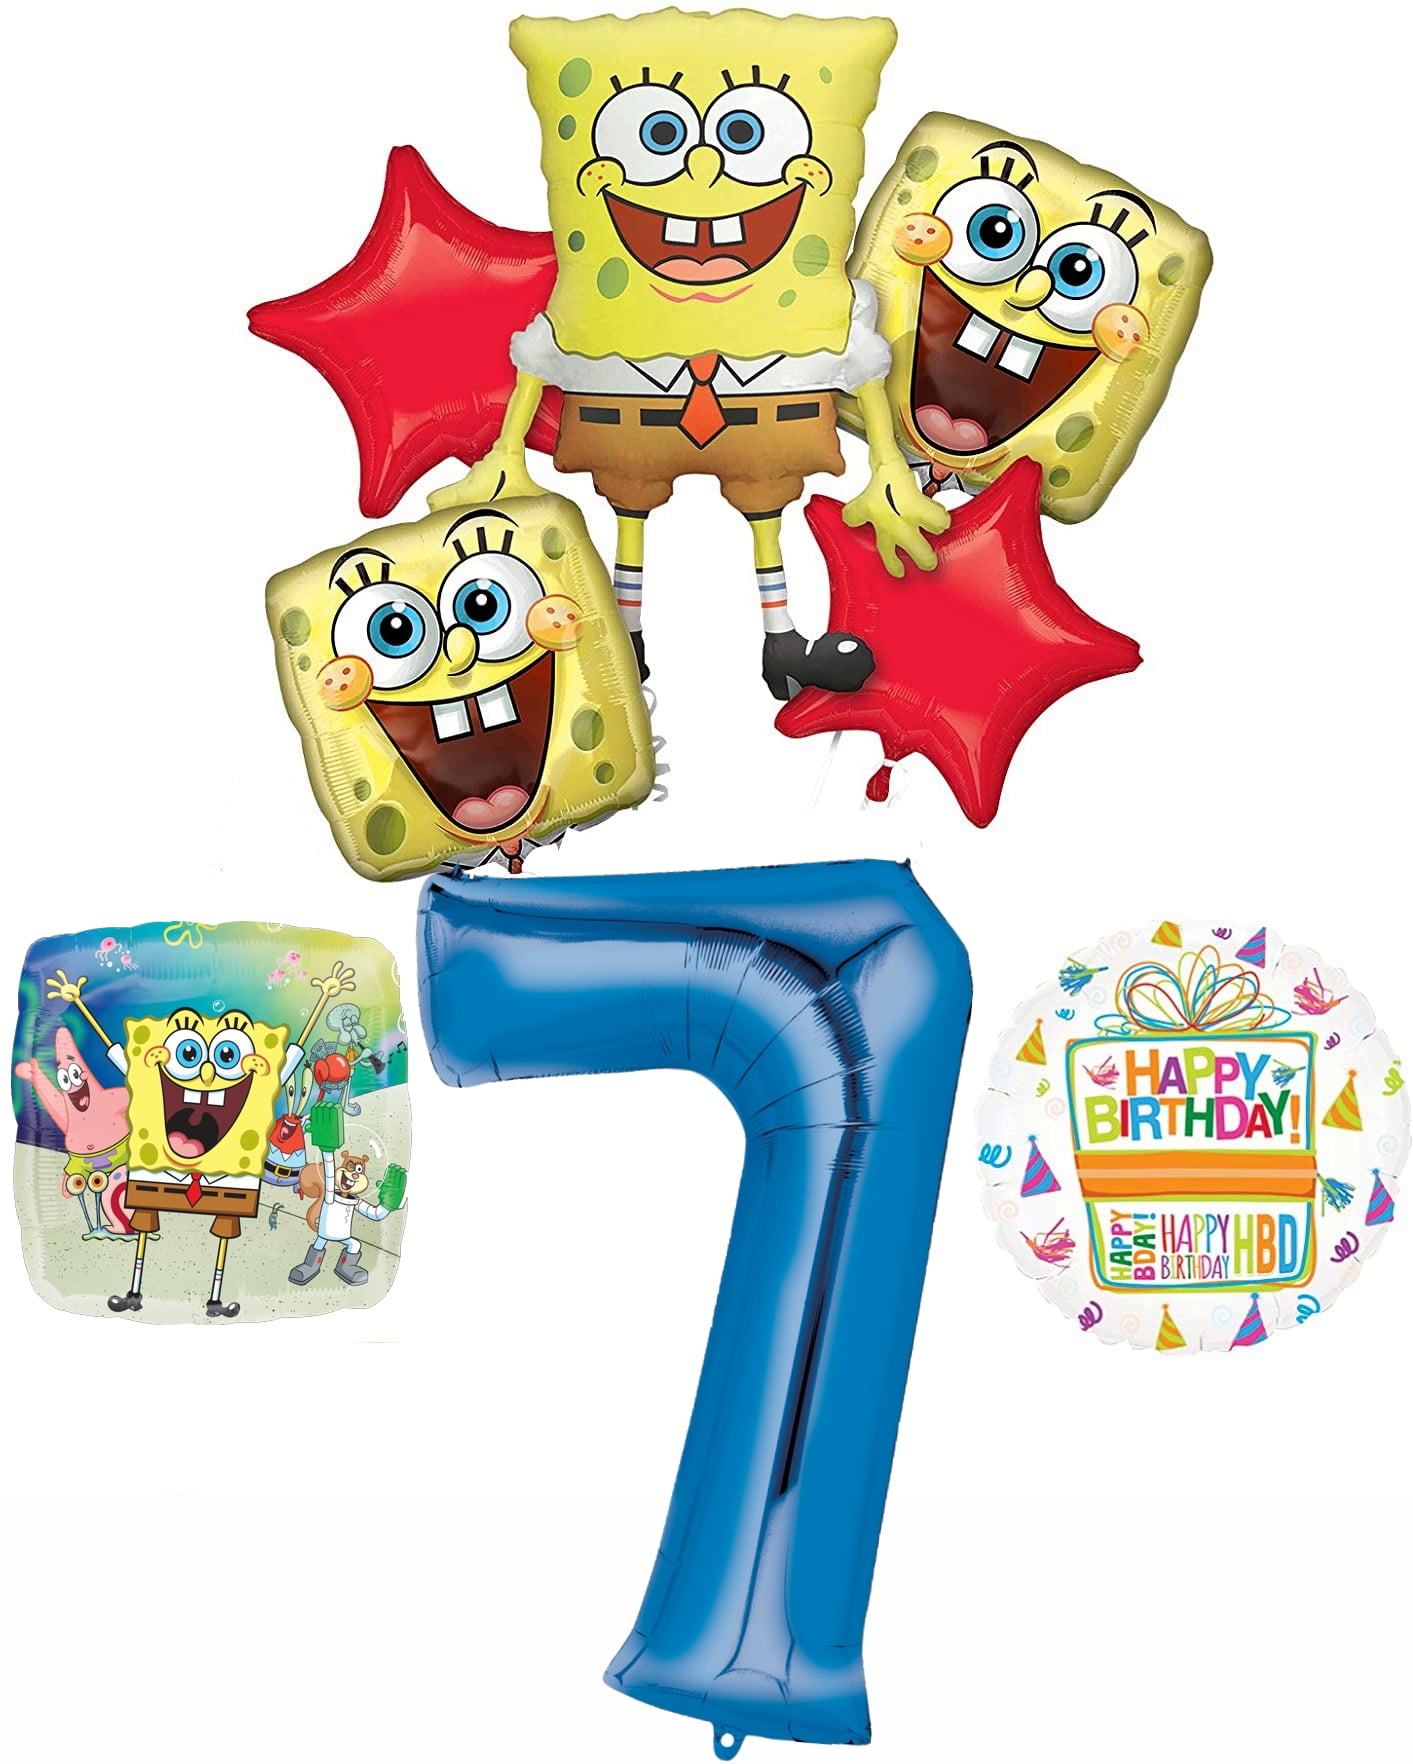 Spongebob Squarepants 7th Birthday Party Supplies and Balloon Bouquet  Decorations 